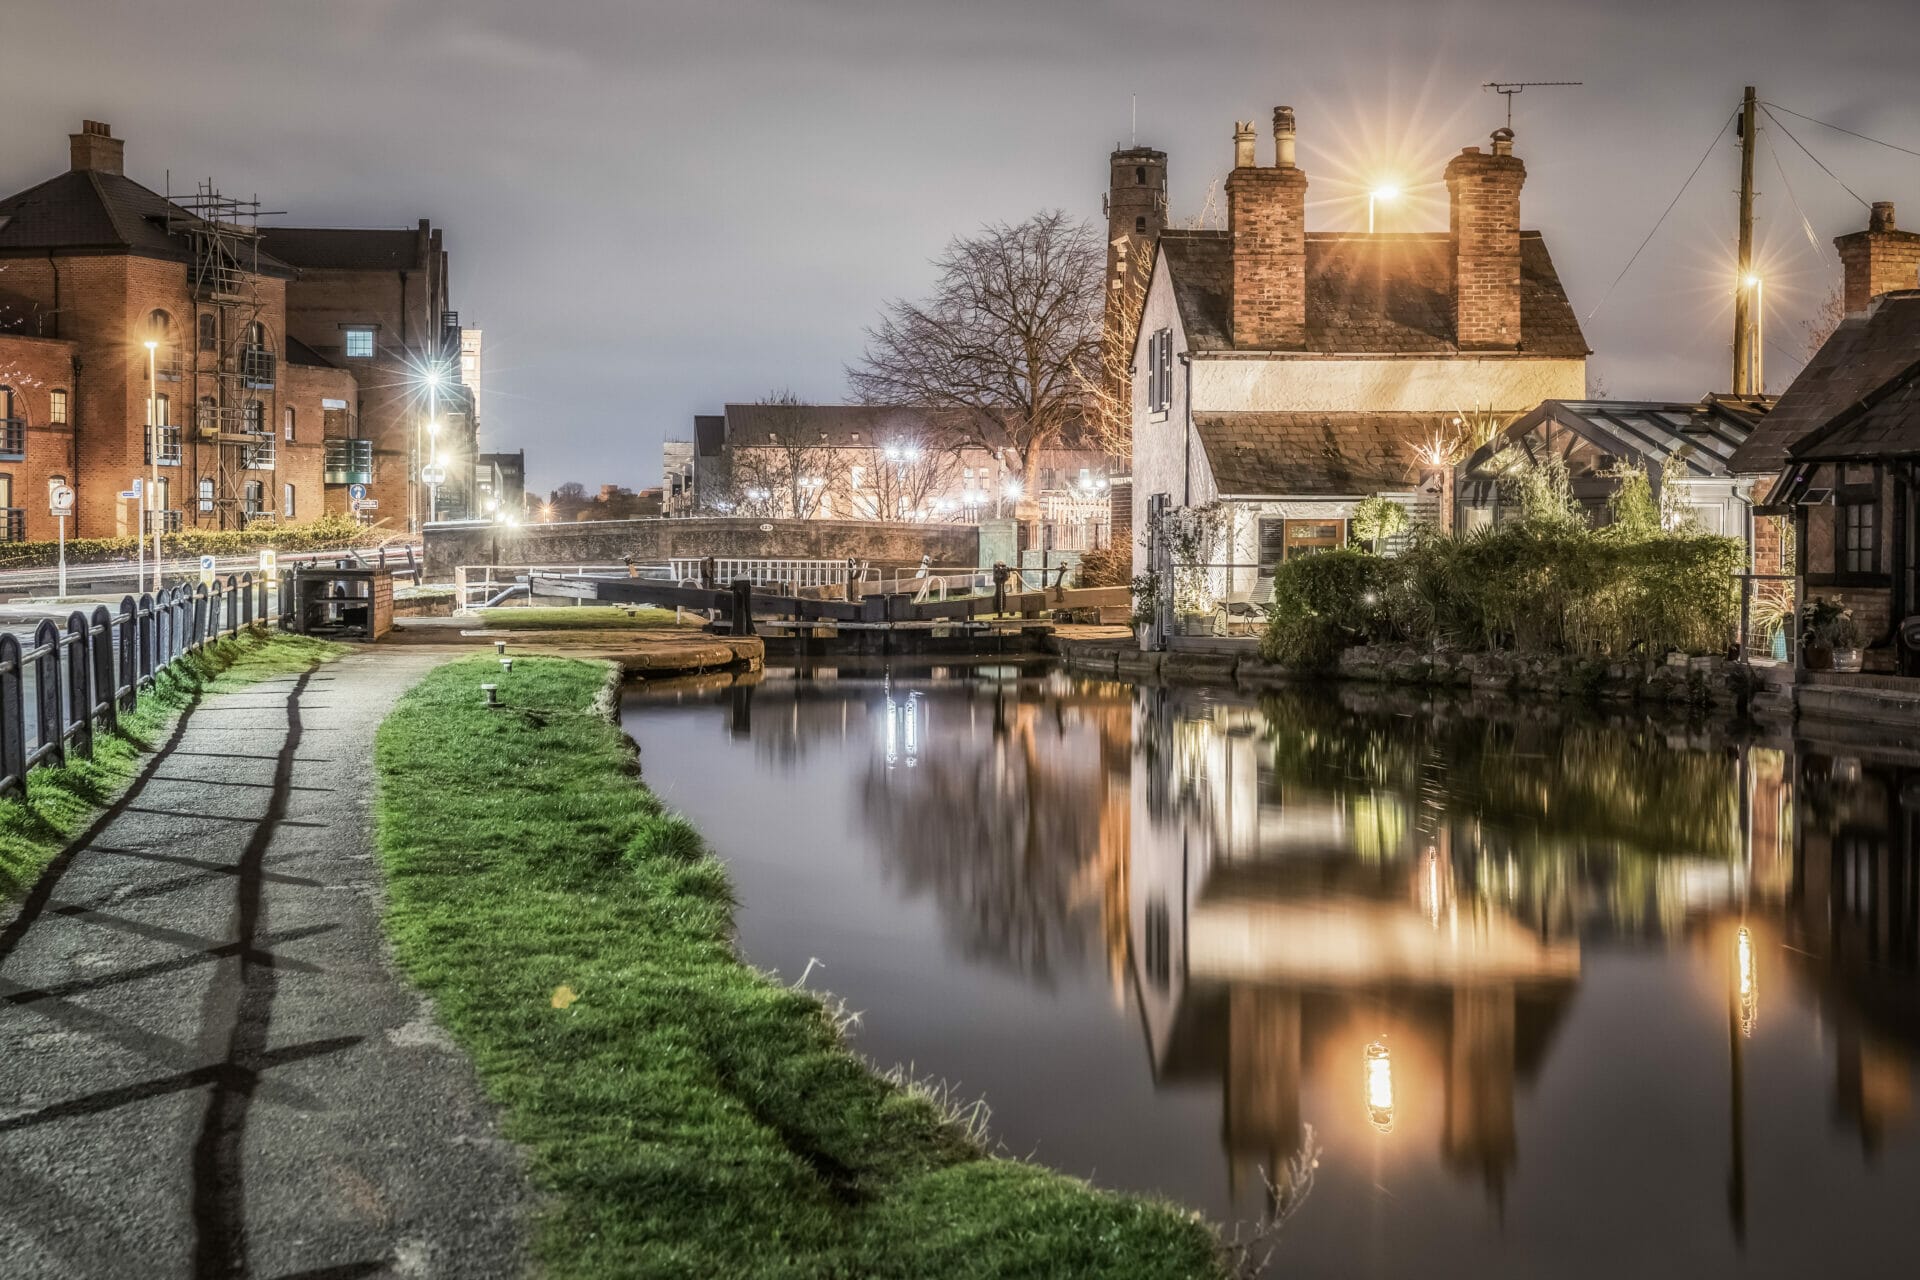 Photo taken in lowlight along the Shropshire Union Canal in Chester.